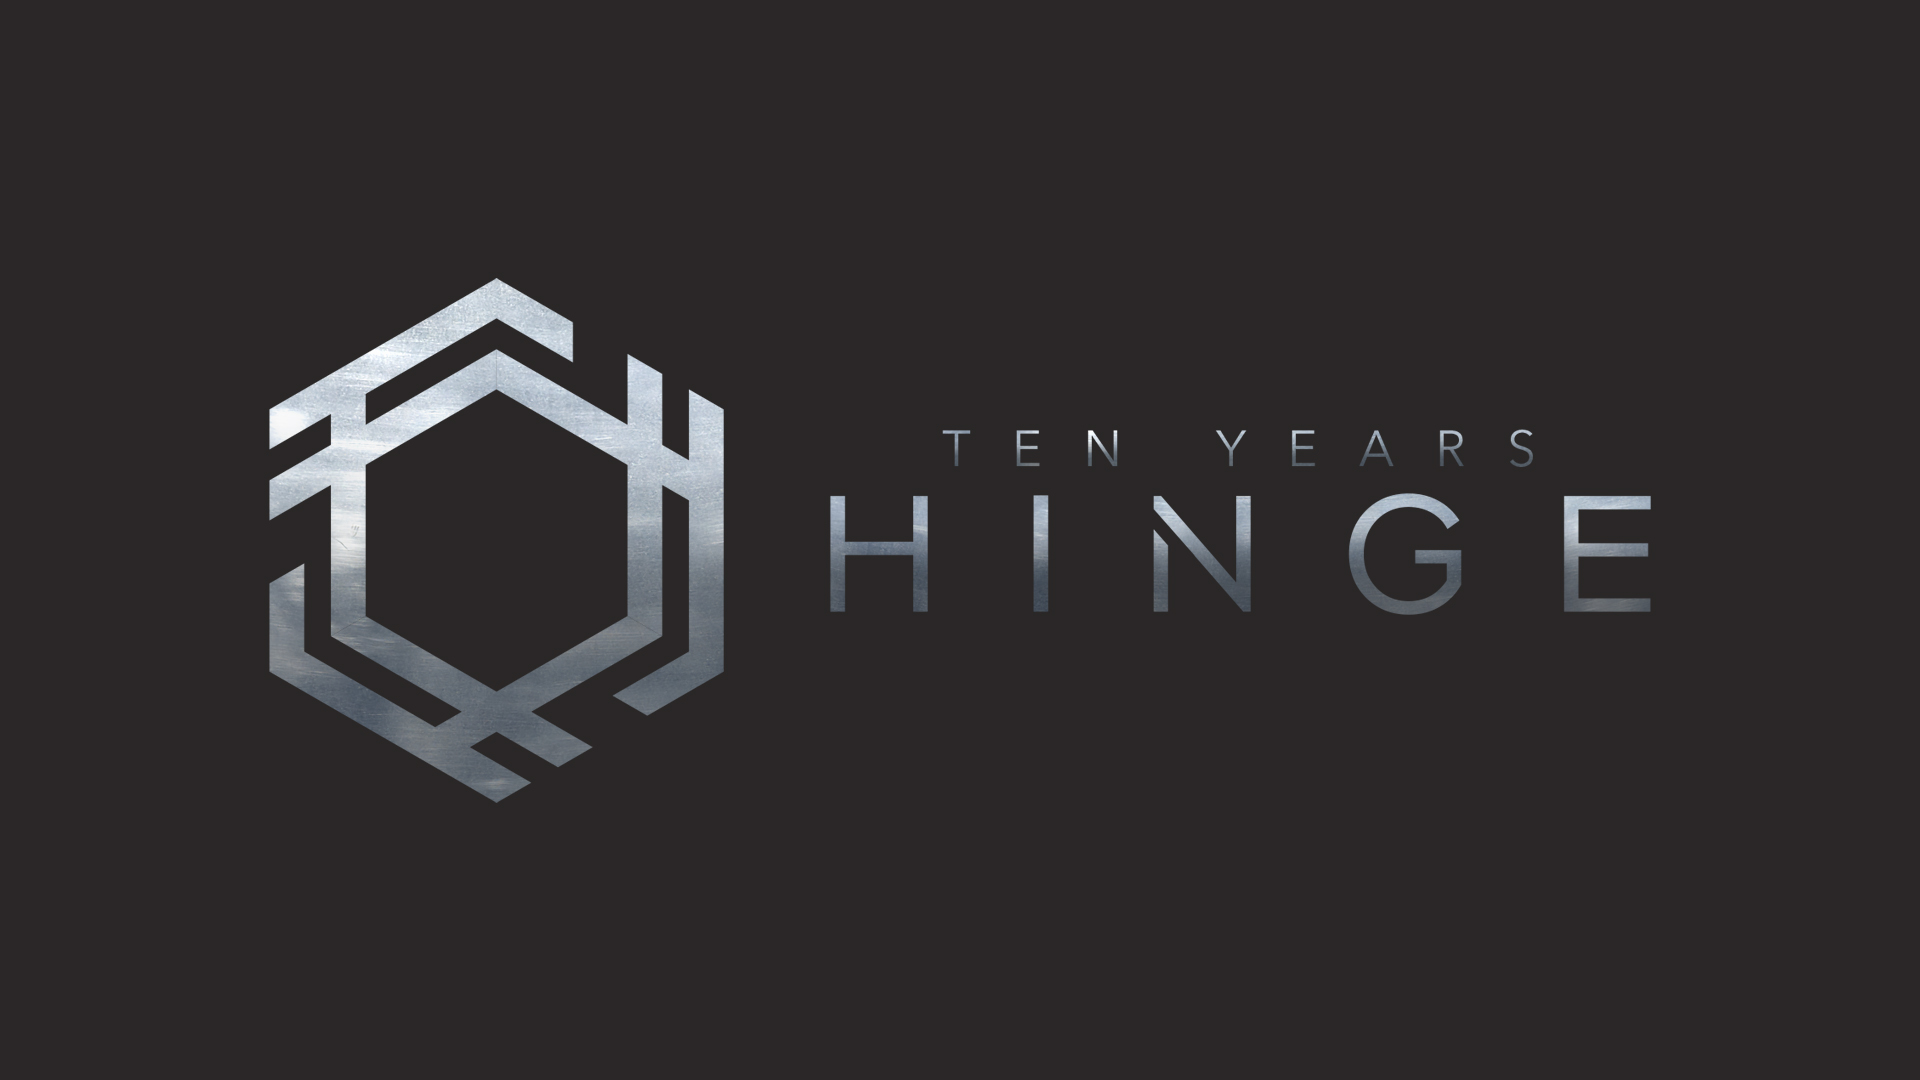 Hinge Swings for the Fences as it Celebrates 10 Years